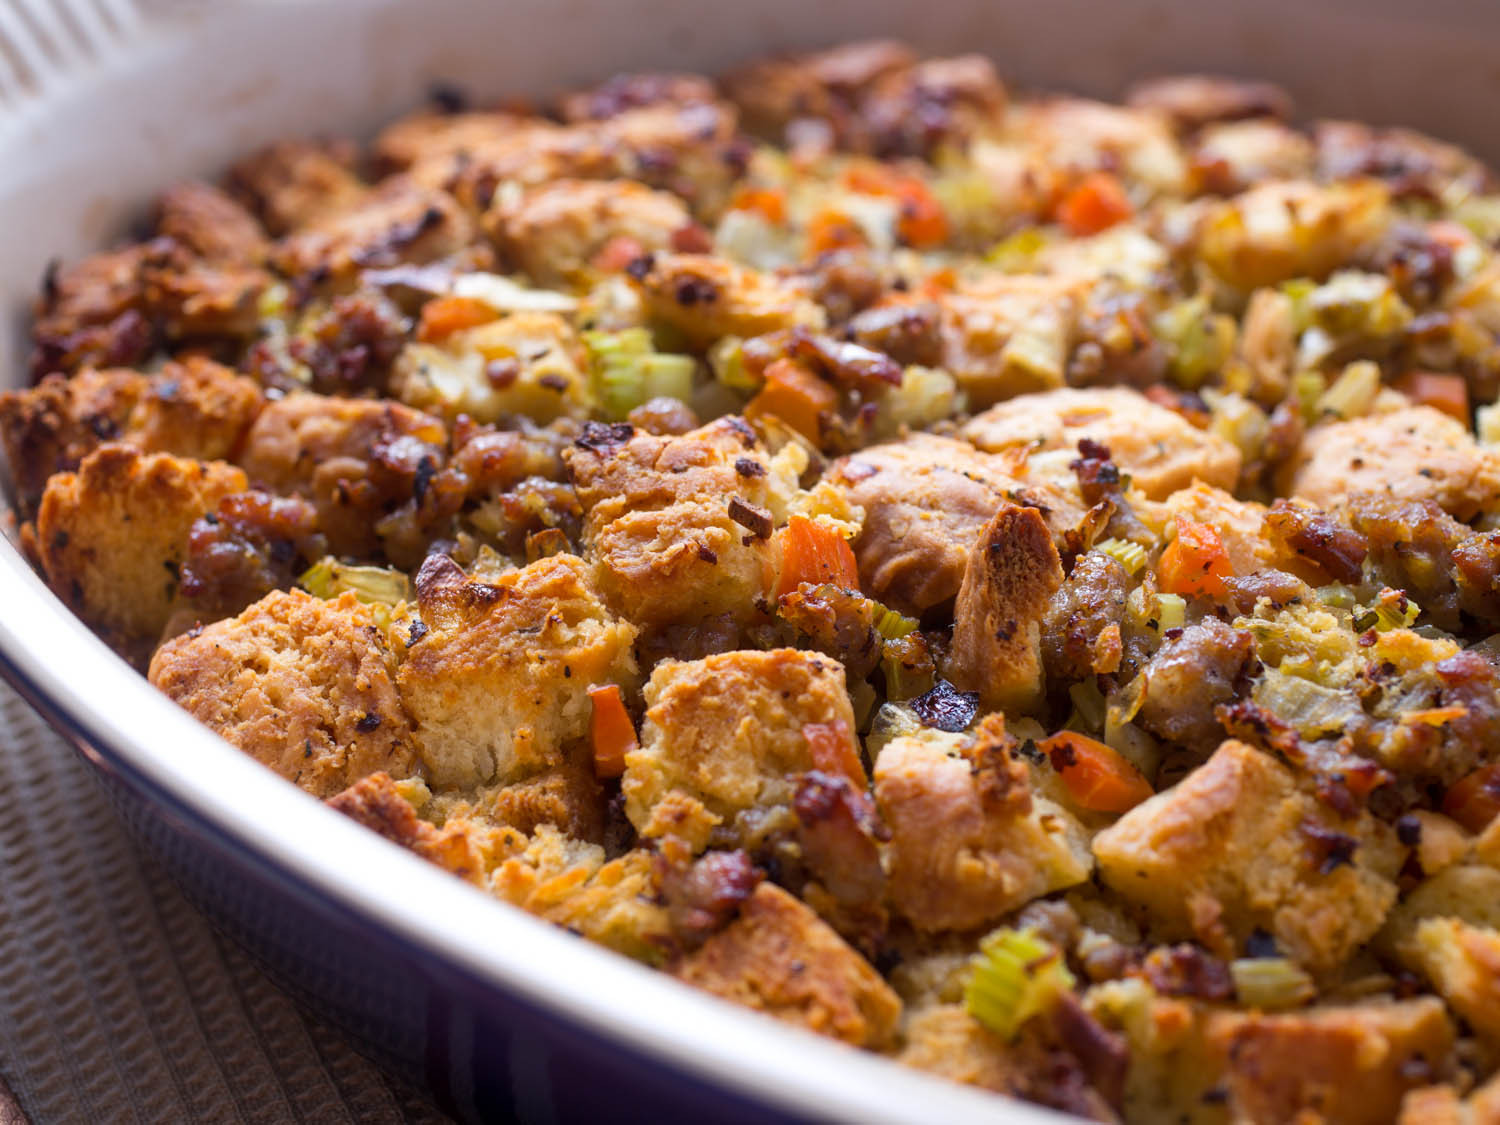 Turkey Stuffing Recipes For Thanksgiving
 Popeye s Buttermilk Biscuit Stuffing Recipe